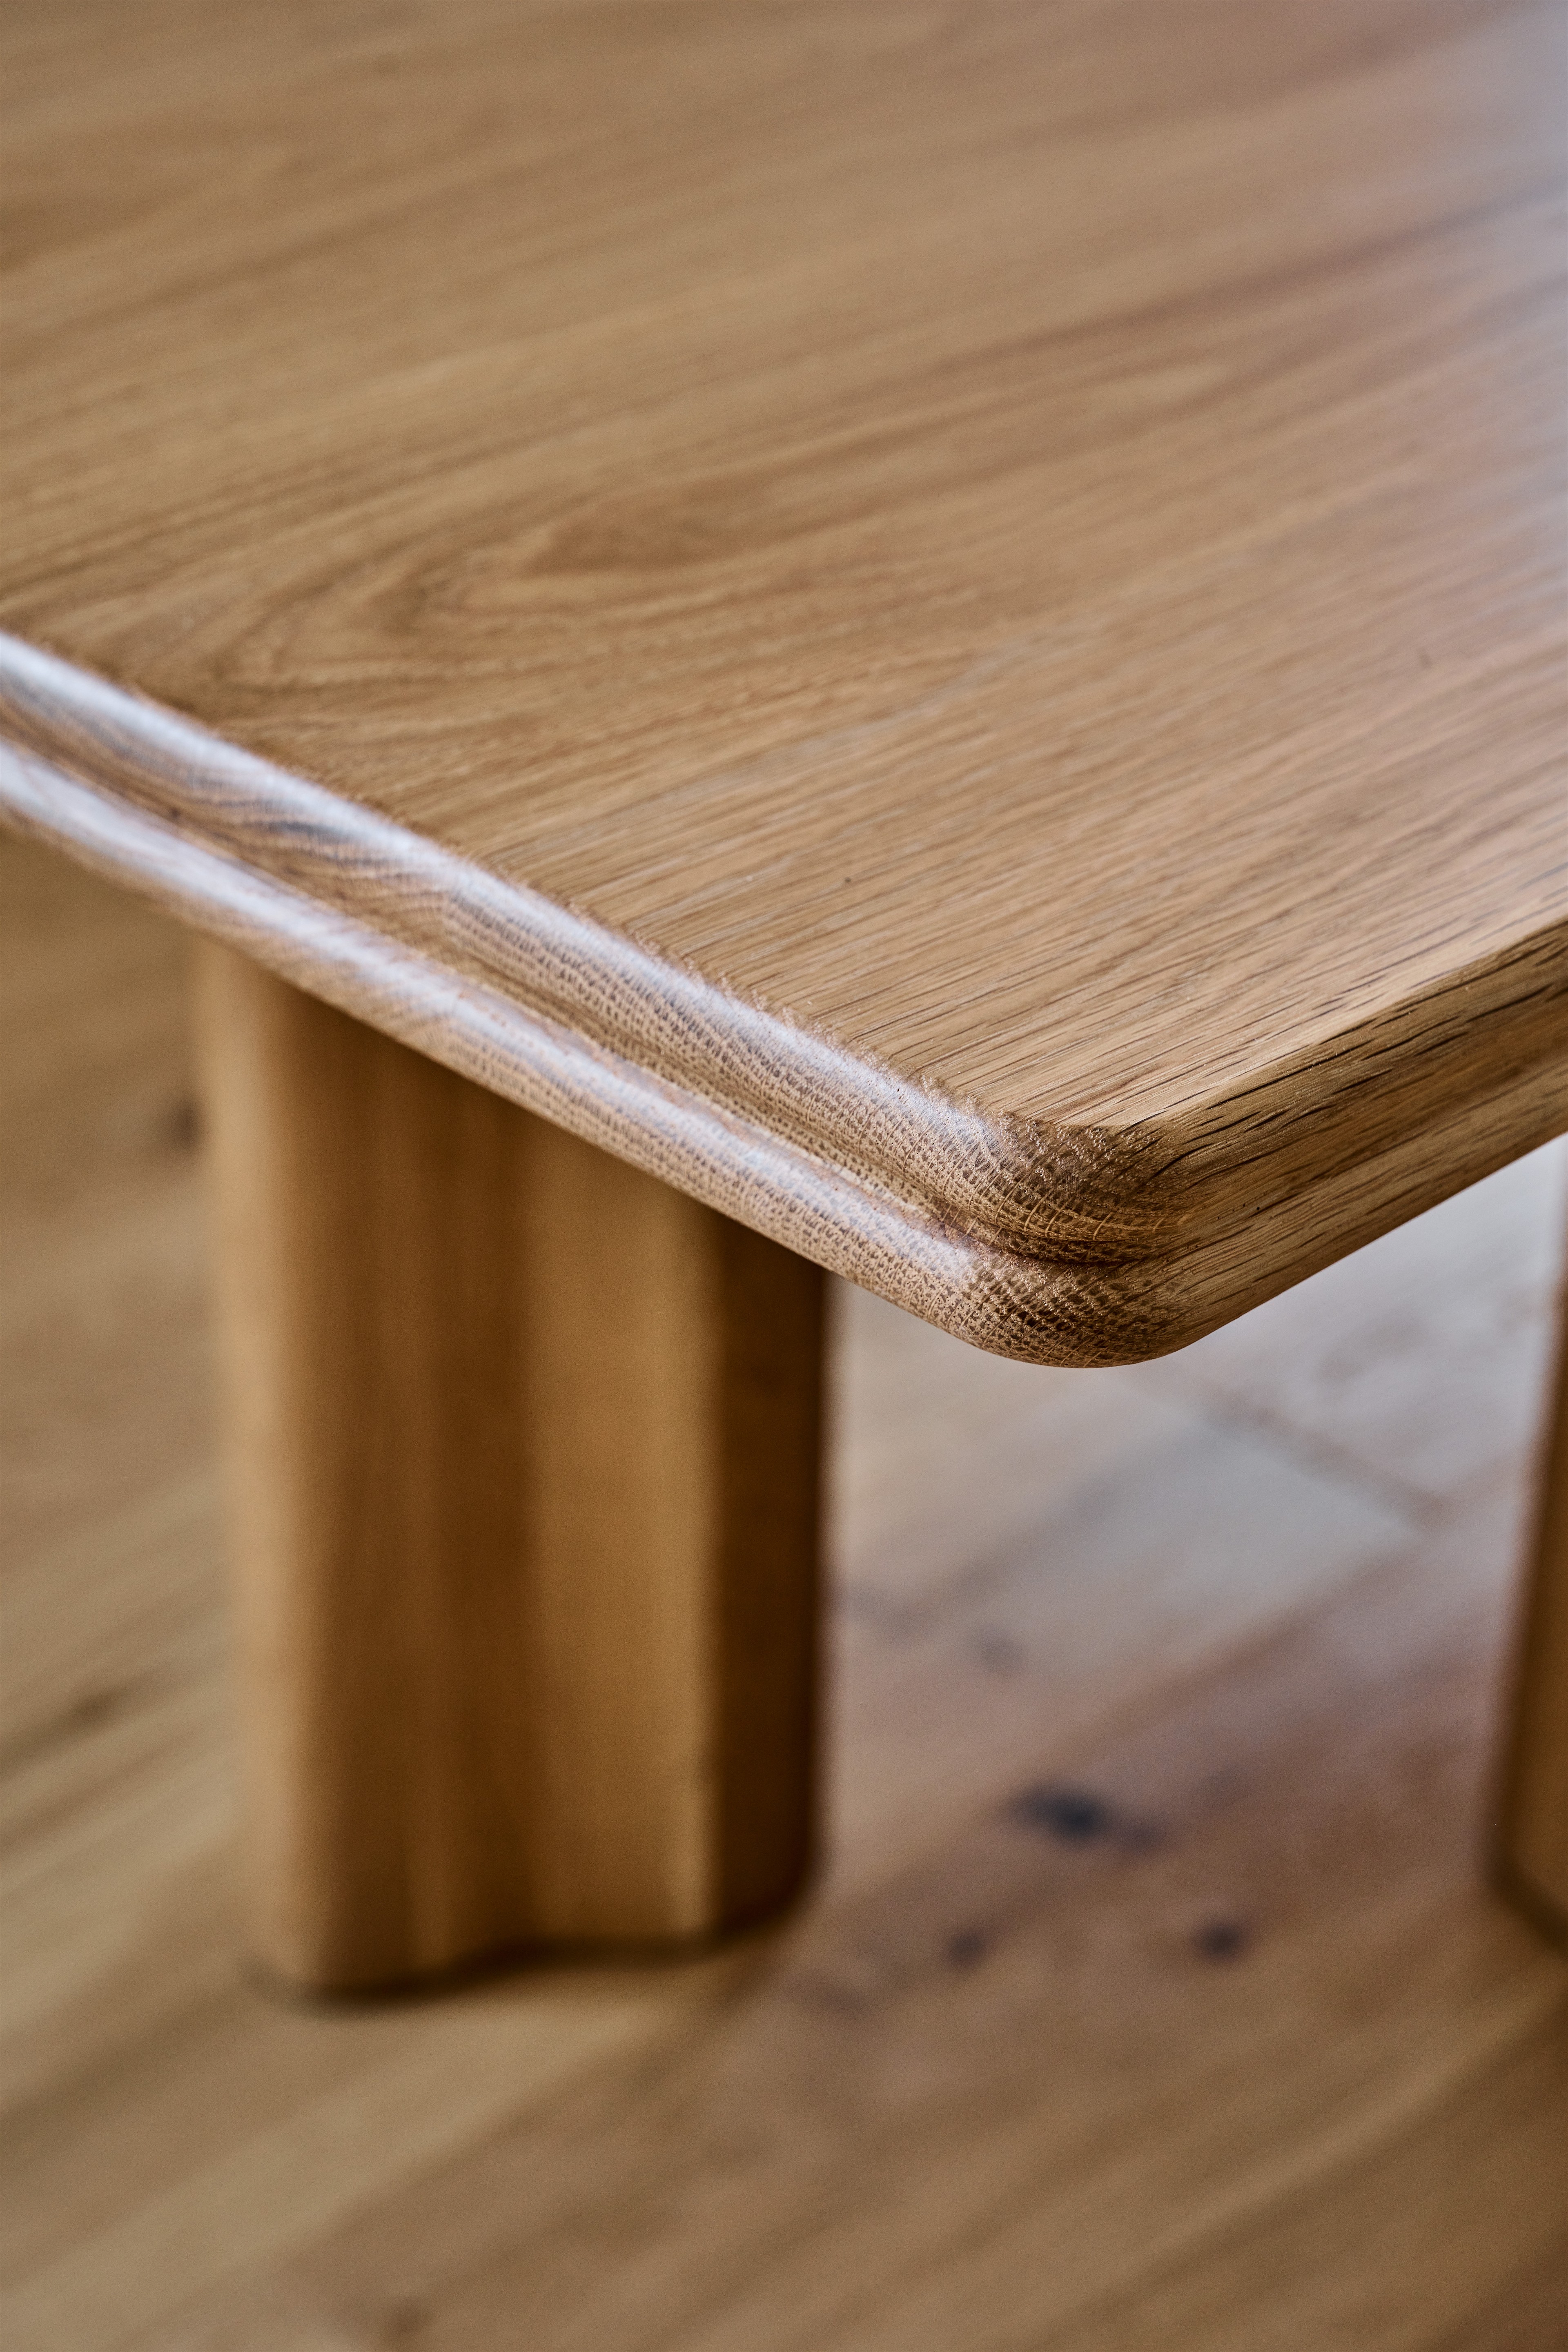 a close up of a wooden table on a hard wood floor